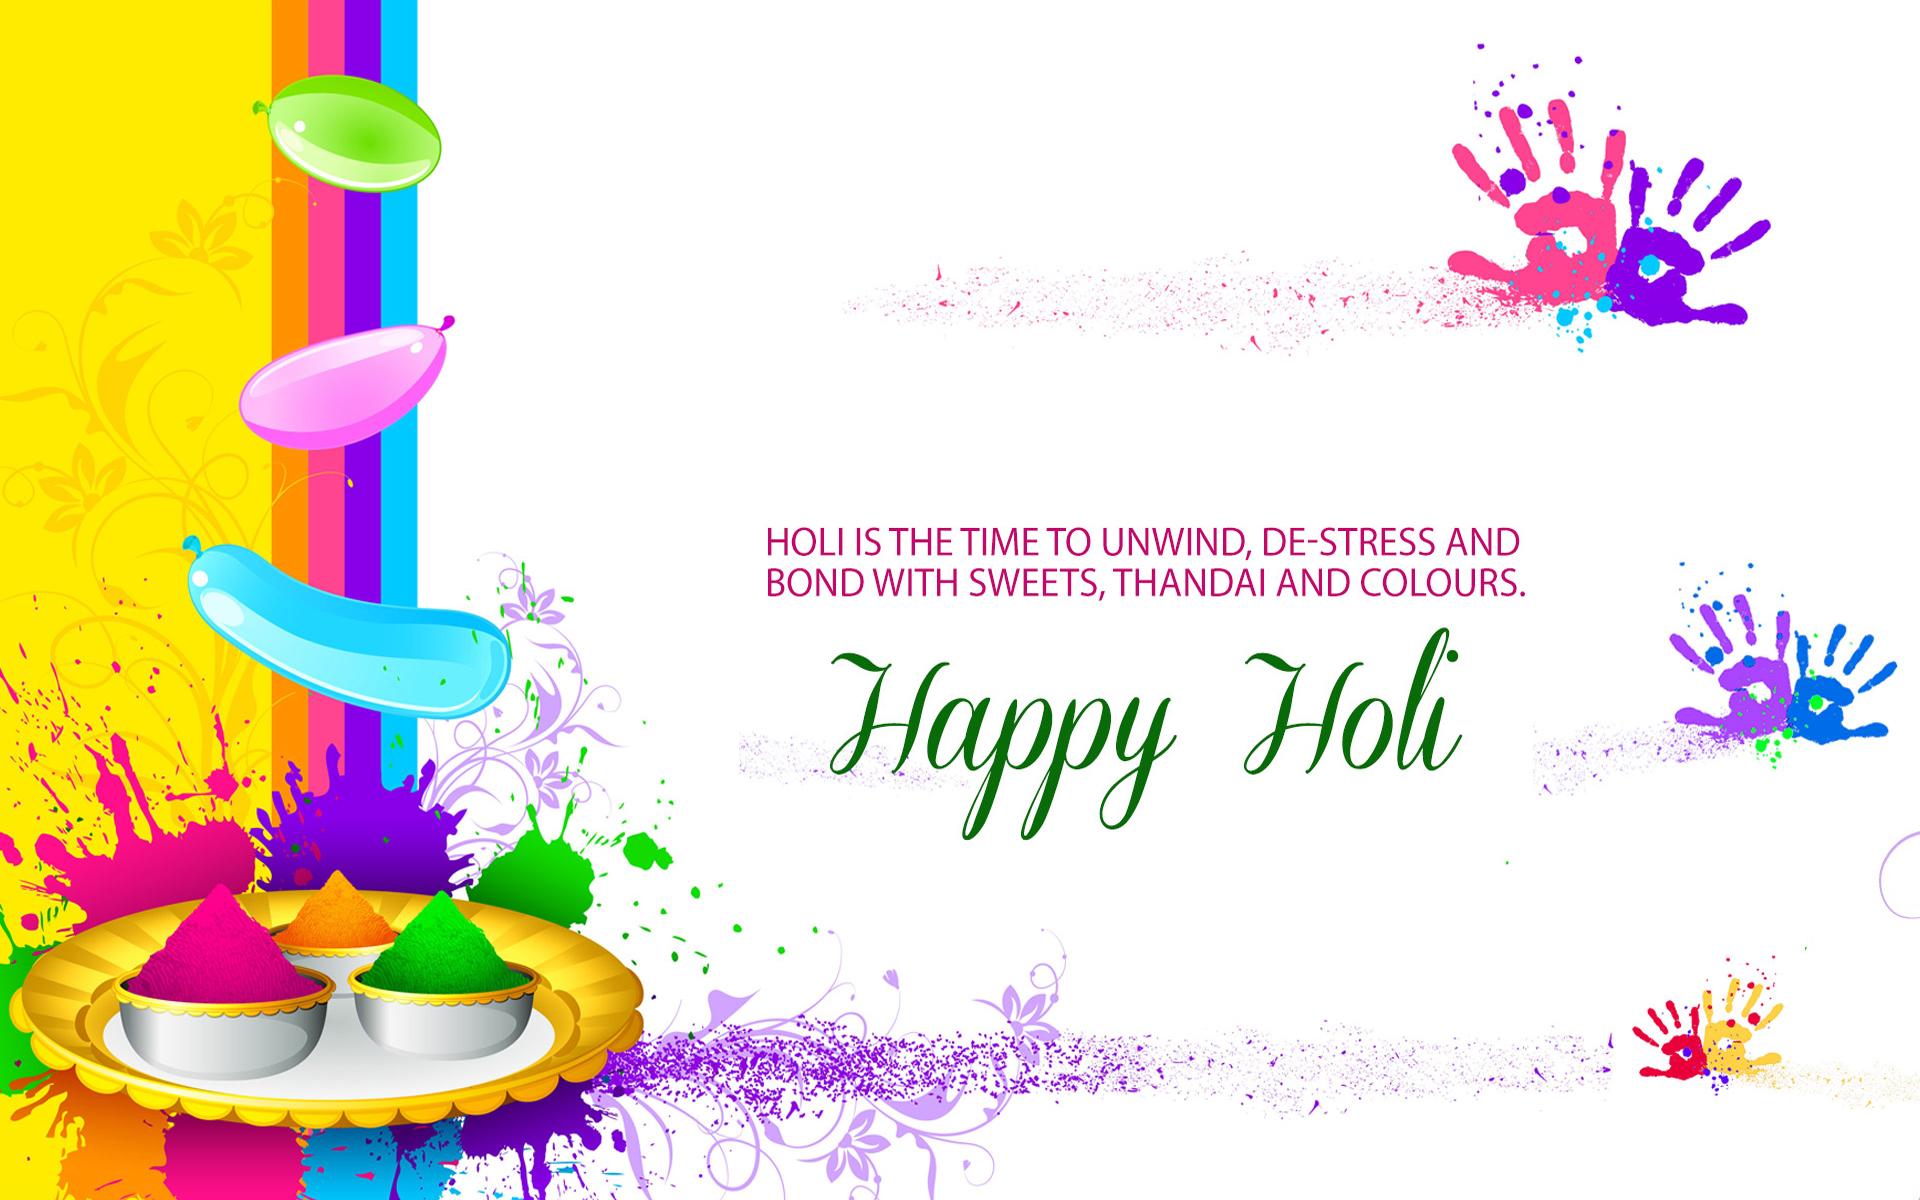 Happy Choti Holi 2019 Wishes Quotes Sms Messages Whatsapp Status Dp